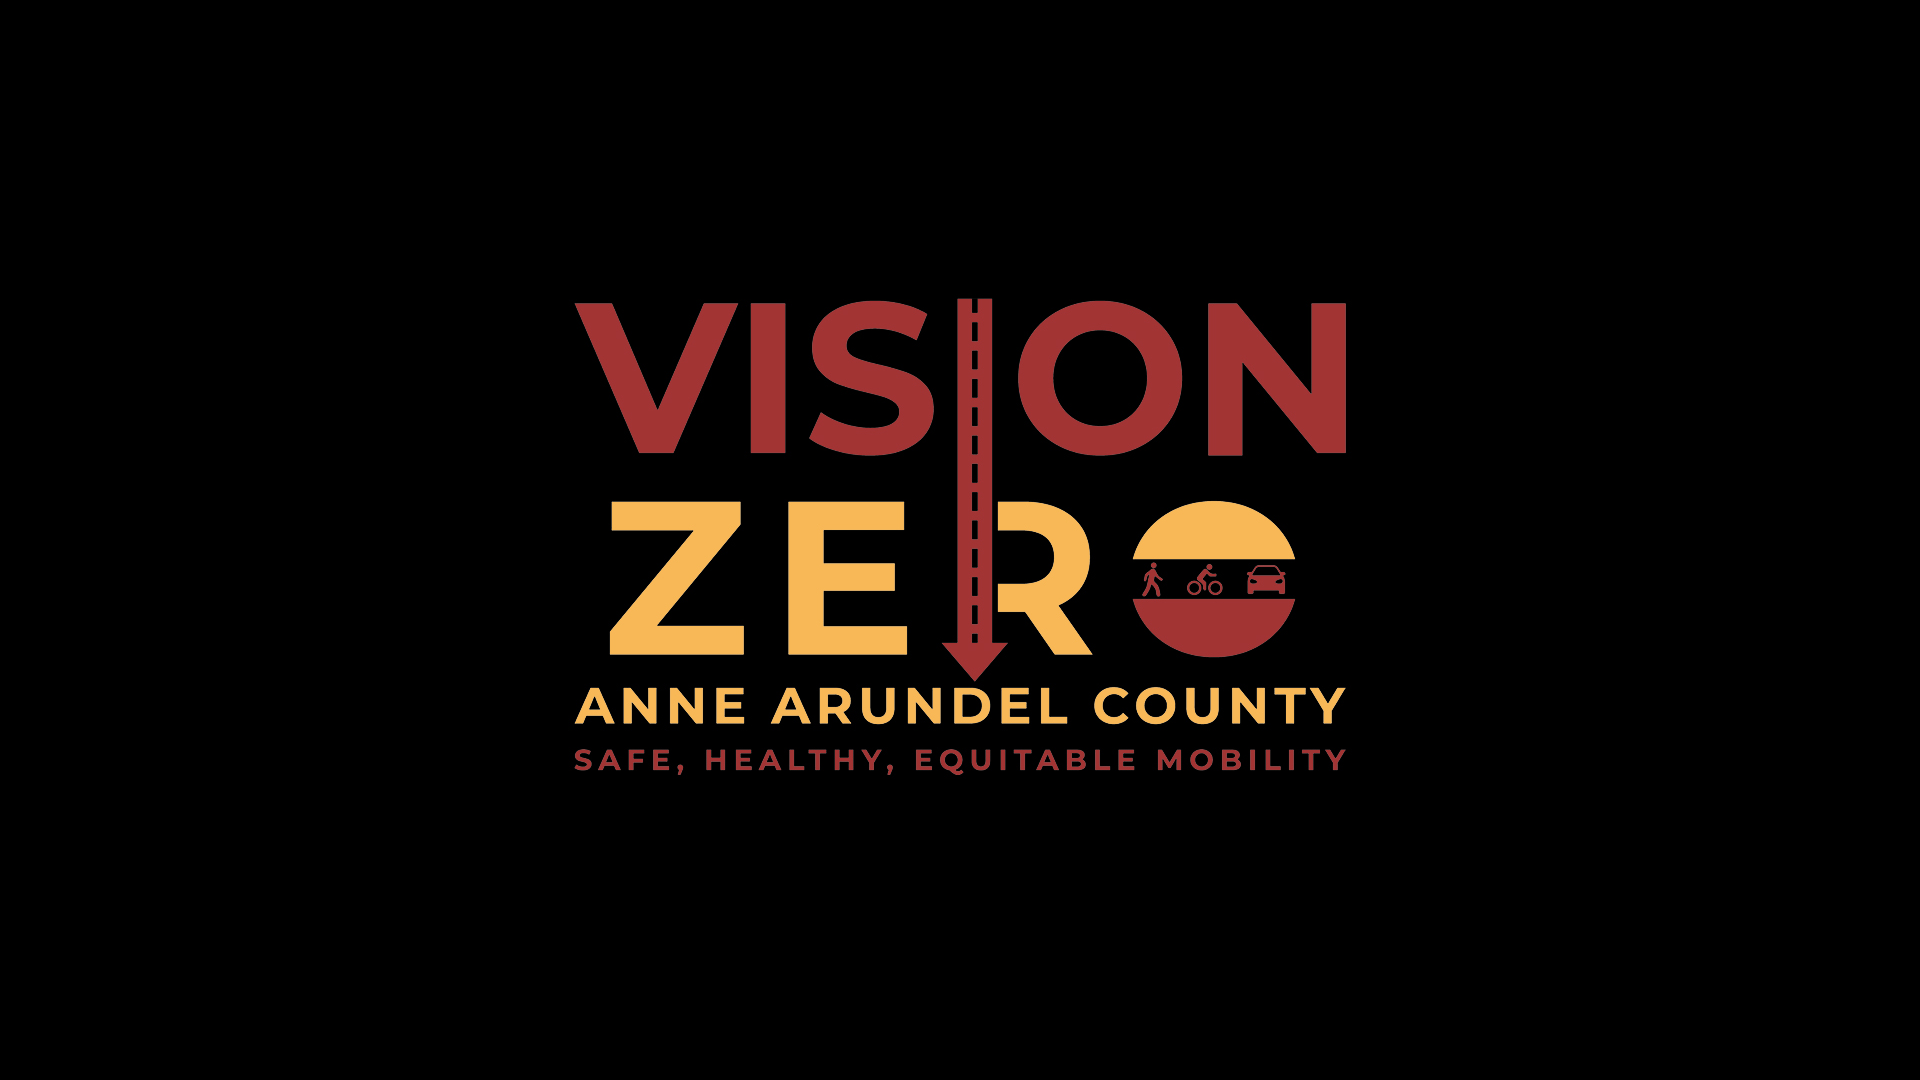 Vision Zero - Safe, Healthy, Equitable Mobility